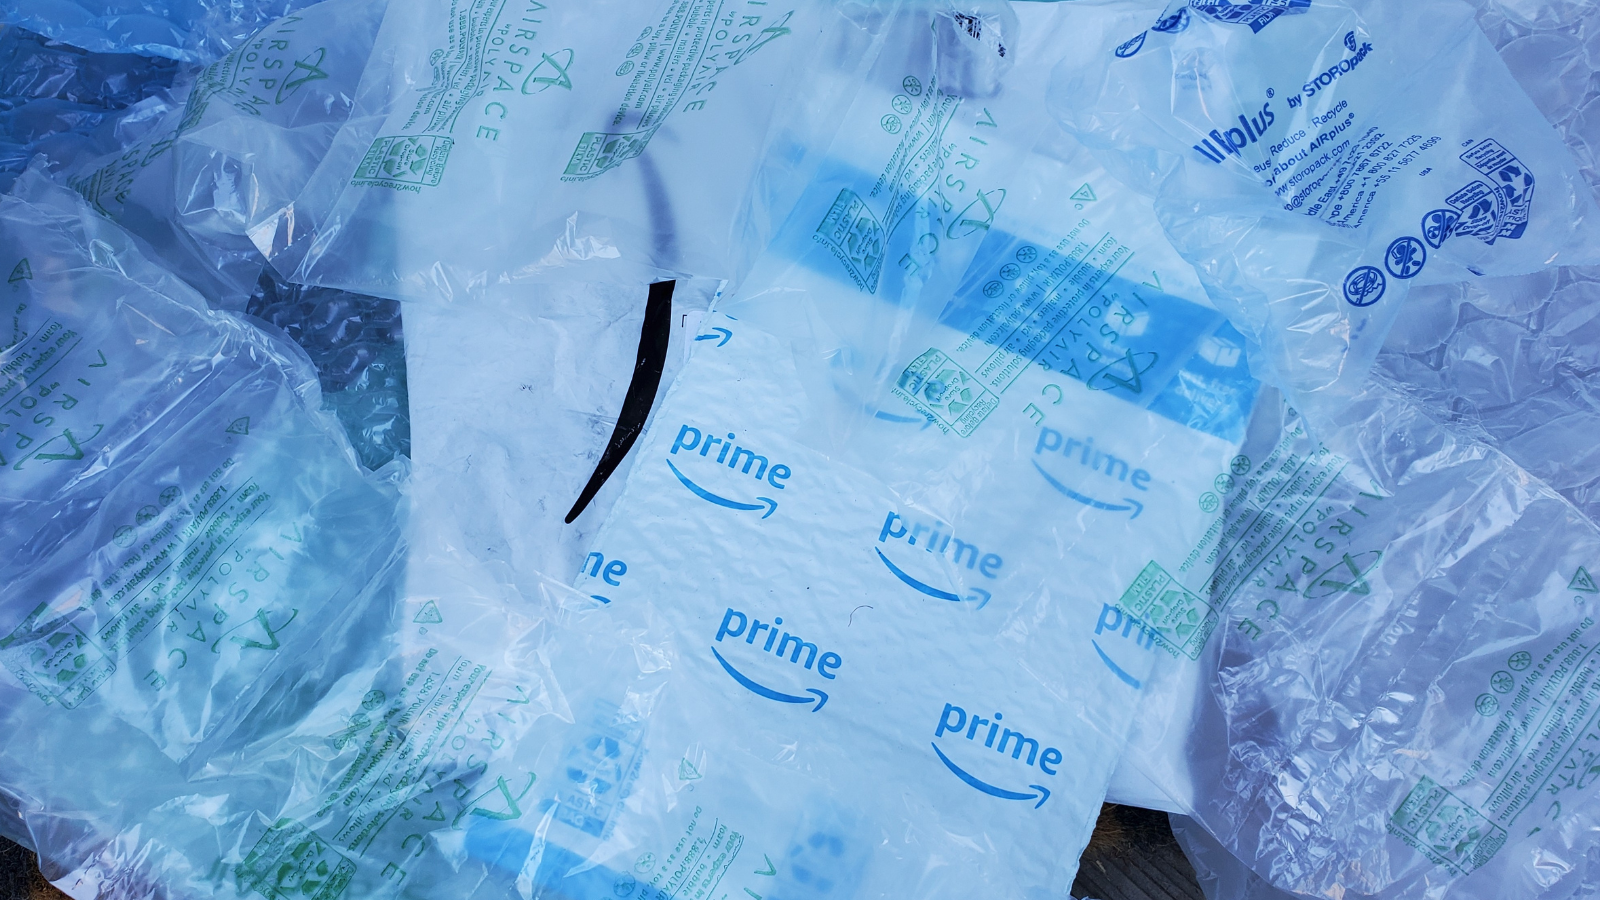 Recycling Tip for Better Results: Plastic Bags and Plastic Film